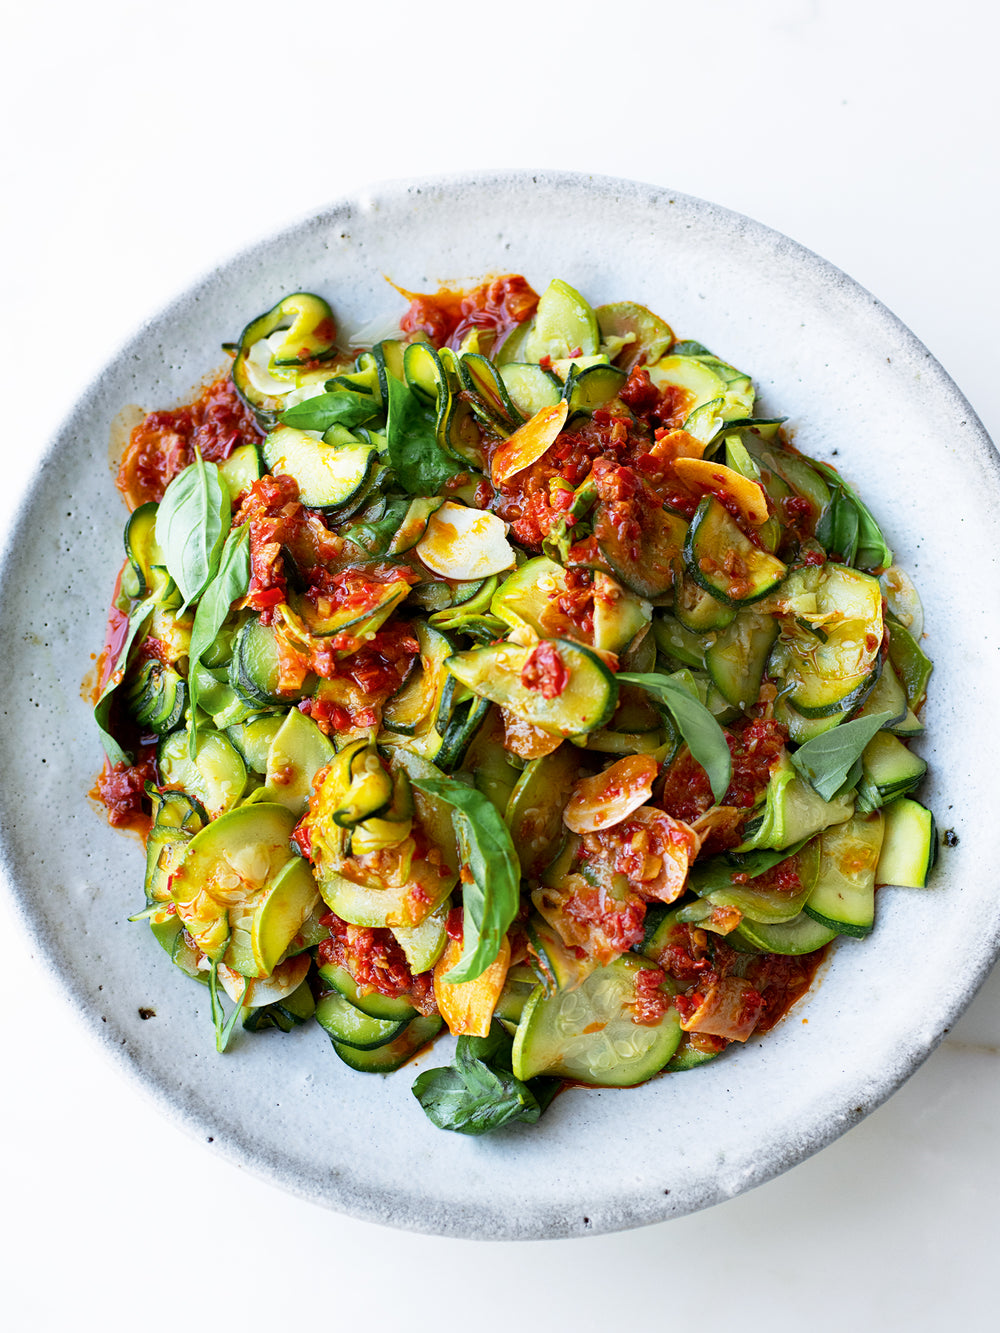 Courgette recipes